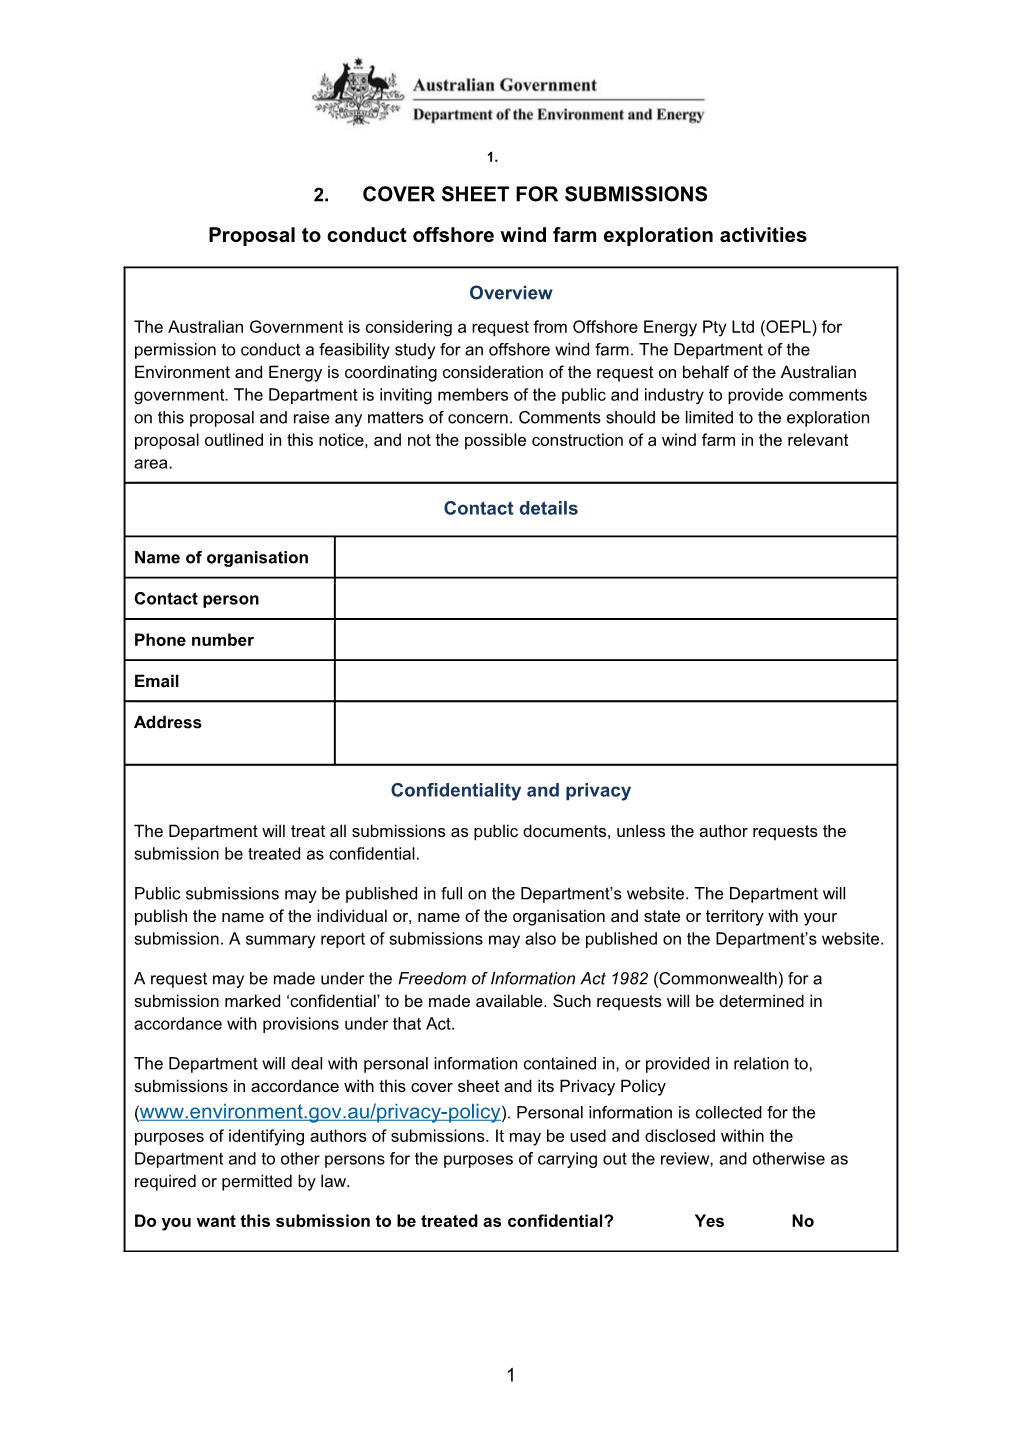 Submission Cover Sheet - Proposal to Conduct Offshore Wind Farm Exploration Activities